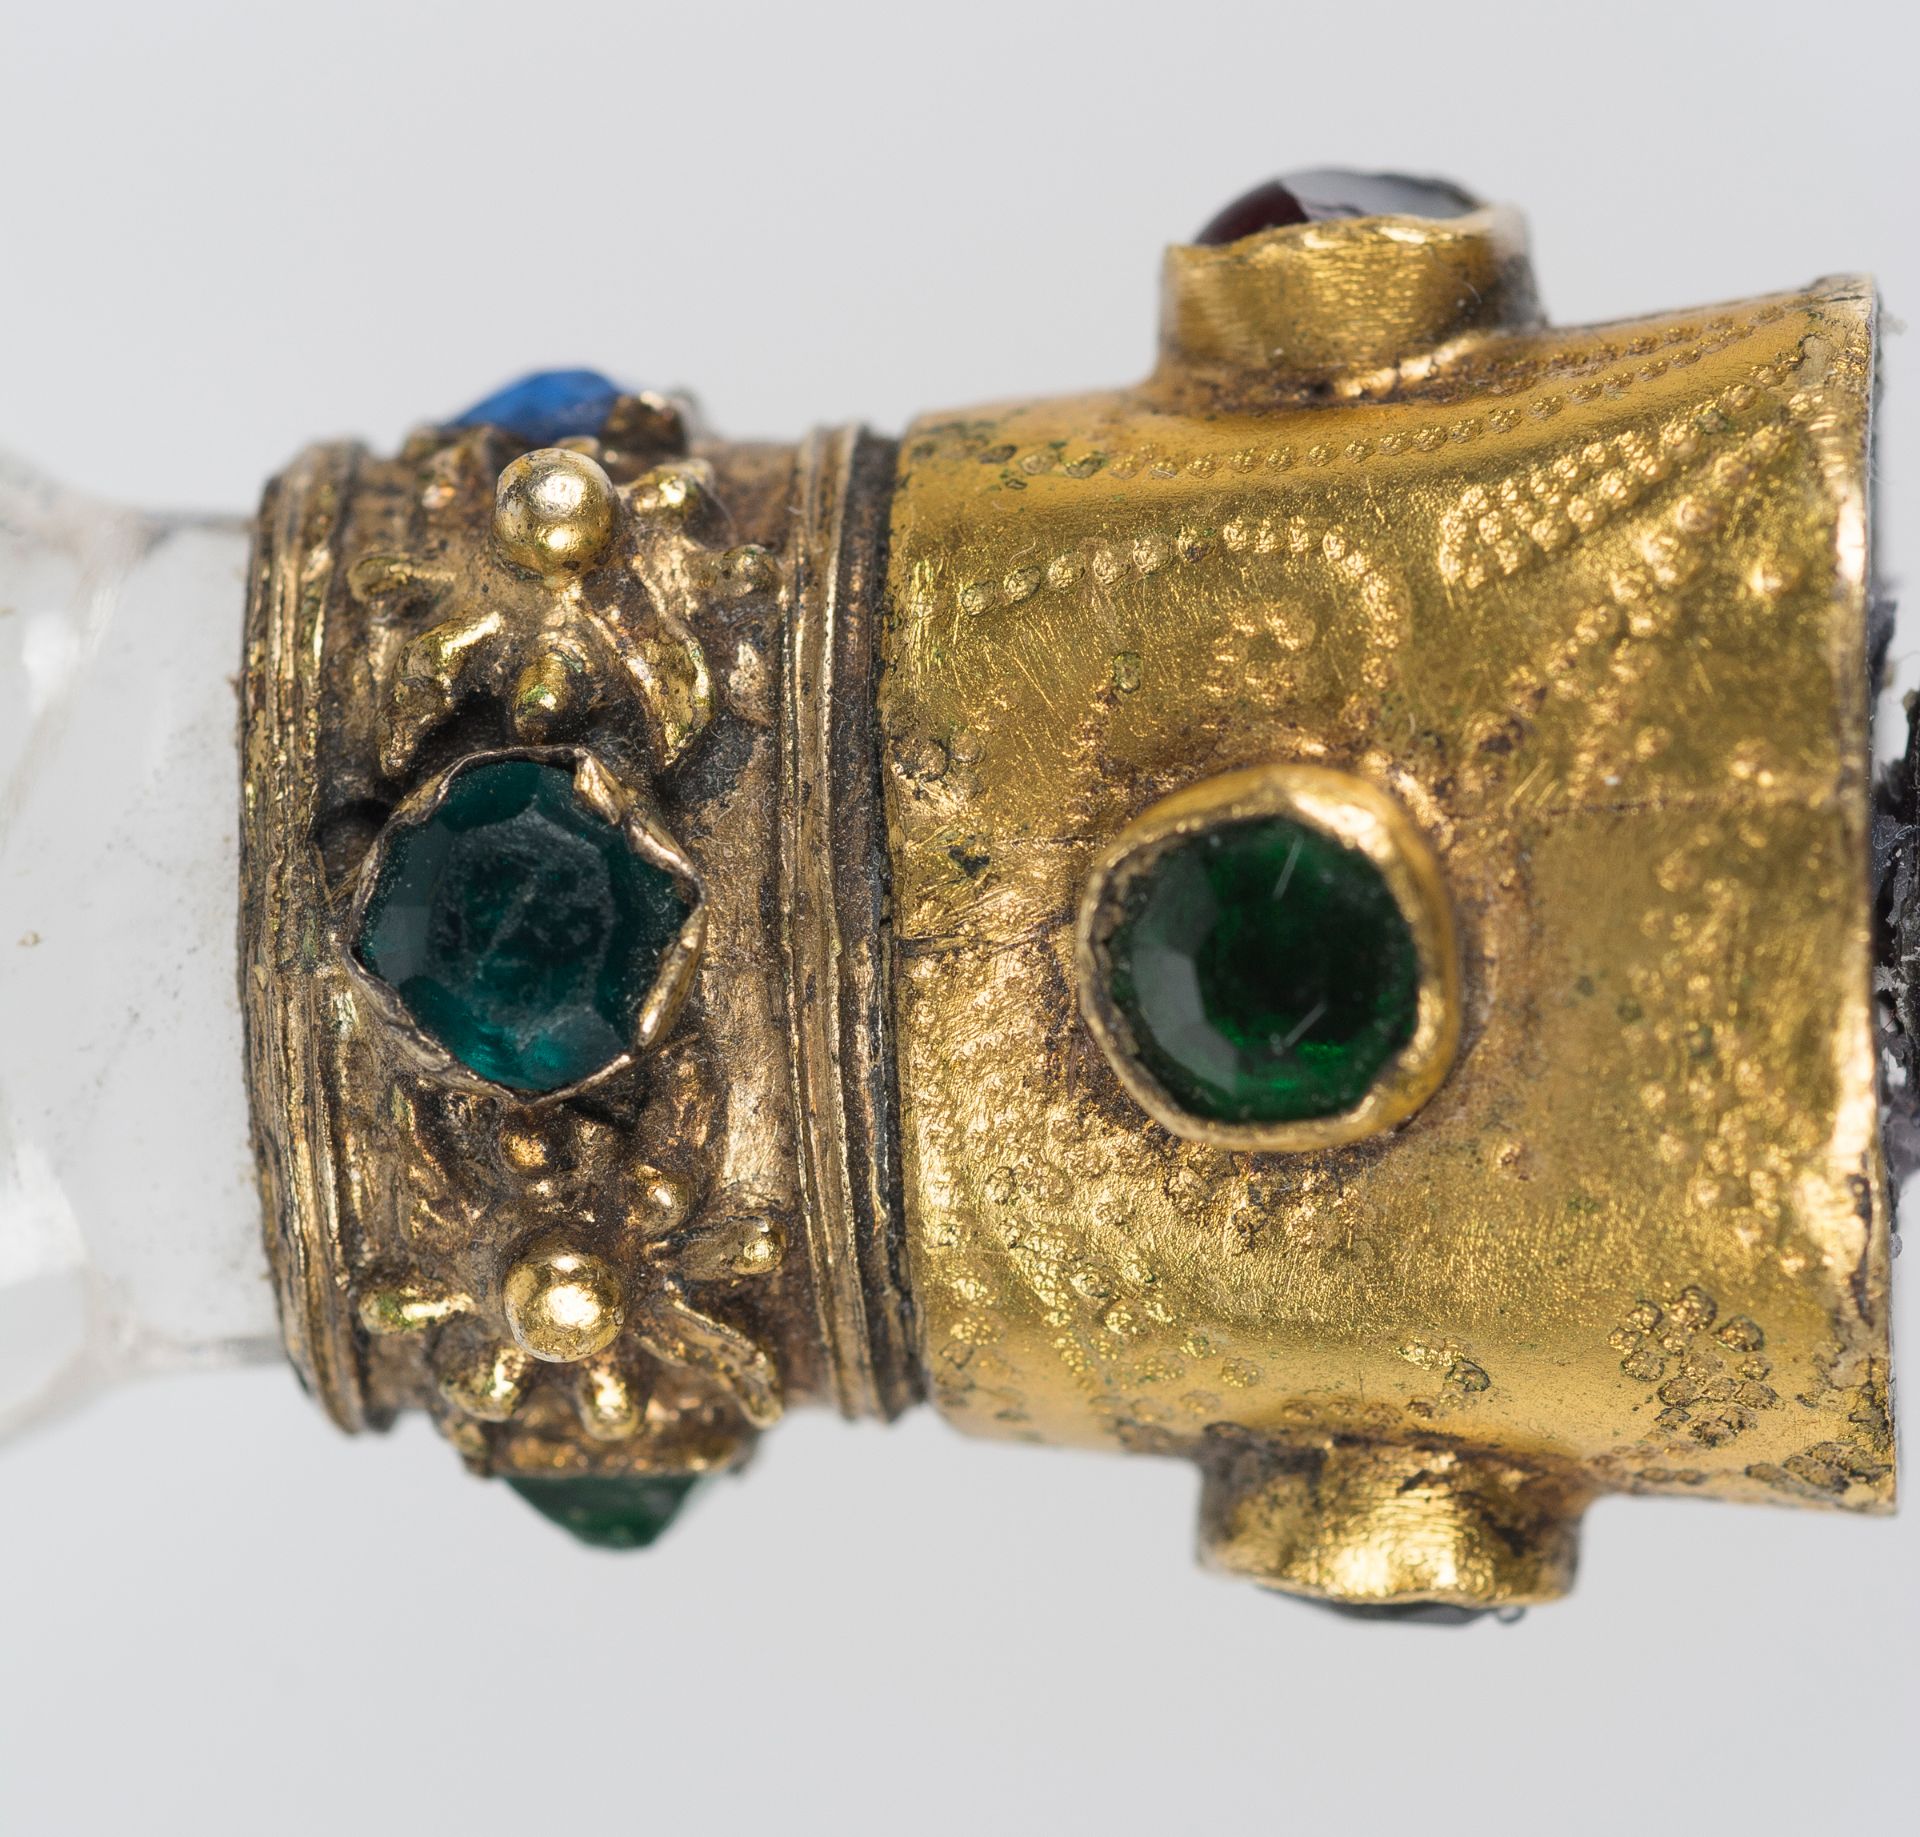 Rock crystal and gilded copper figa with precious stone cabochons. Gothic. 15th century. - Image 3 of 7